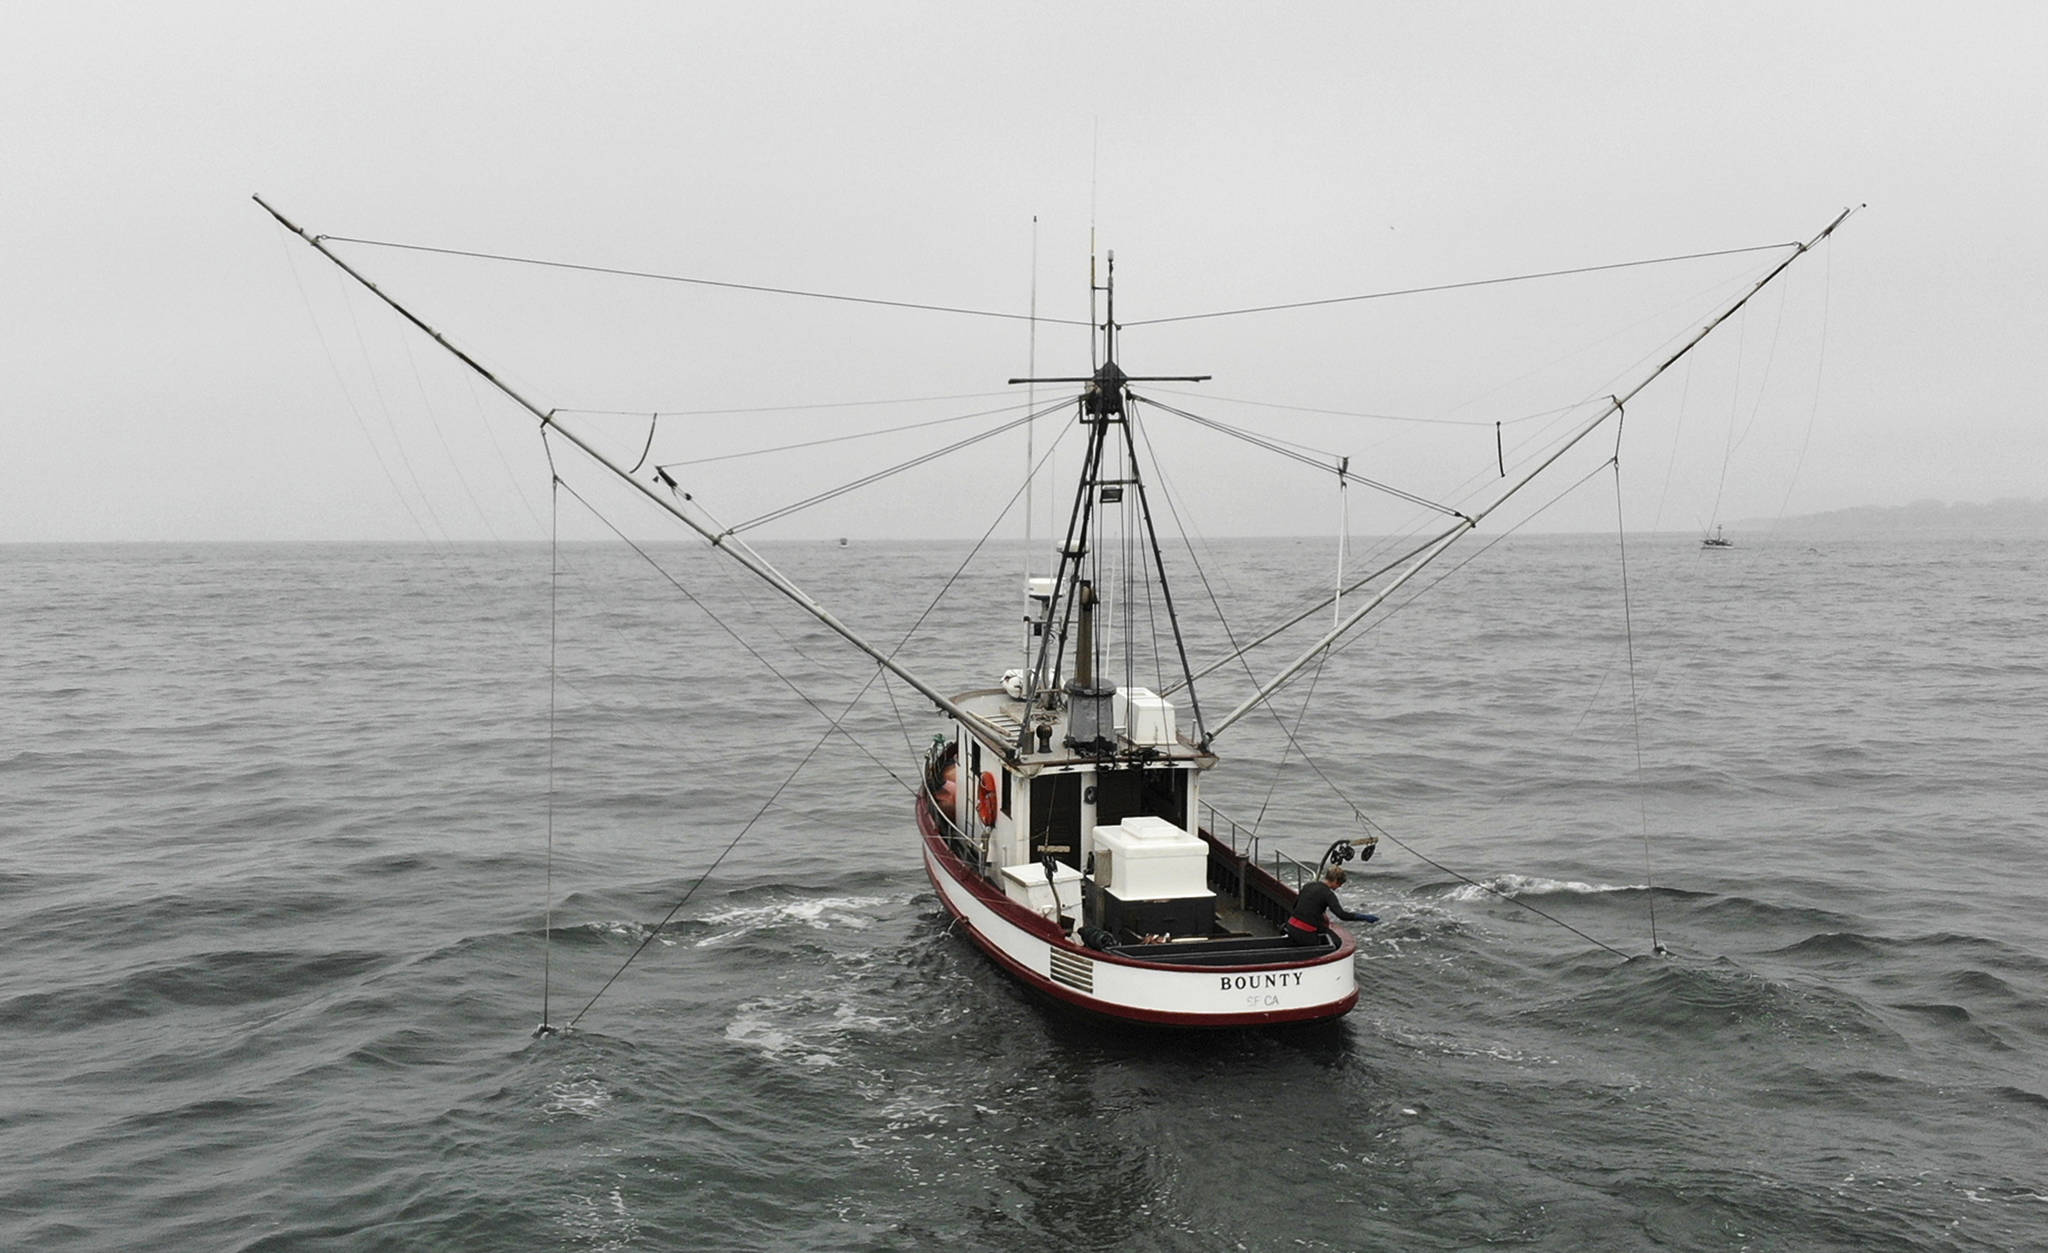 In this photo taken July 17, 2019, Sarah Bates fishes for chinook salmon on her boat Bounty off the coast of Bolinas, Calif. California fishermen are reporting one of the best salmon fishing seasons in more than a decade, thanks to heavy rain and snow that ended the state’s historic drought. It’s a sharp reversal for chinook salmon, also known as king salmon, an iconic fish that helps sustain many Pacific Coast fishing communities. (AP Photo/Terry Chea)